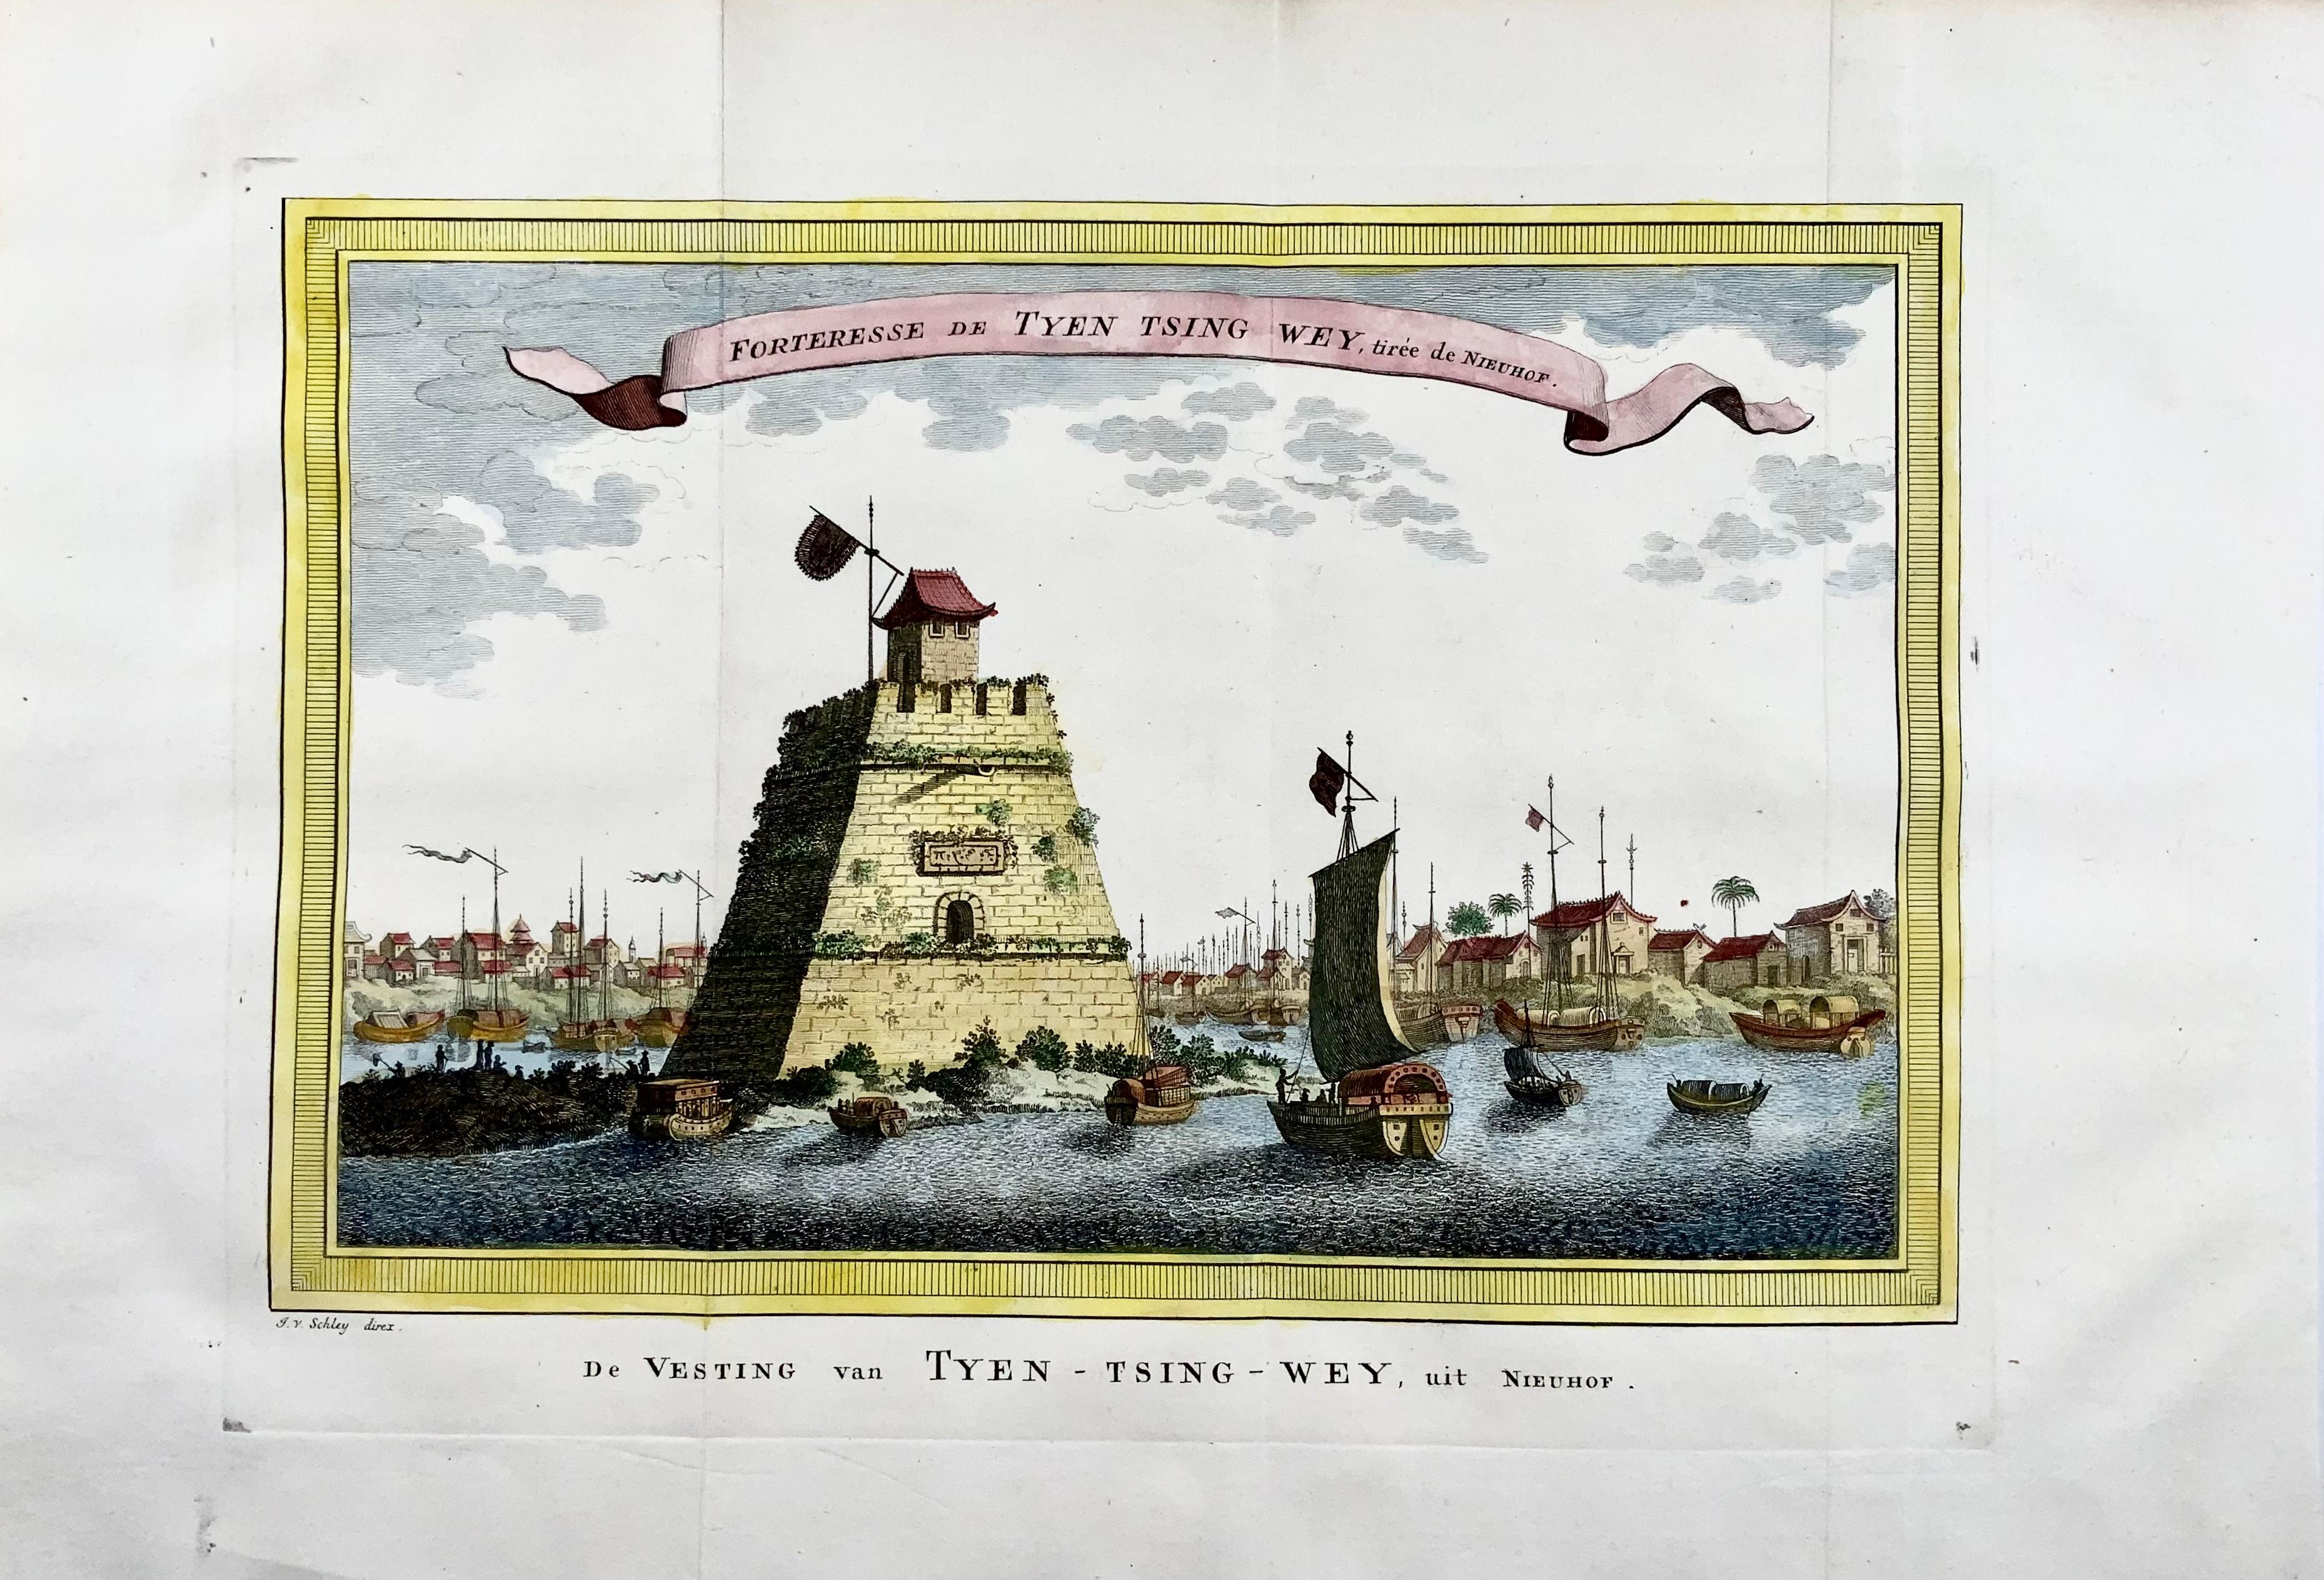 Forteresse de Tyen Tsing Wey, tiree de Nieuhof

Published ca 1755.

Fine hand colour.

Rare original copper plate engraved antique print the Fortress (long ago demolished) guarding the cross roads of the meeting of the major rivers in Beijing